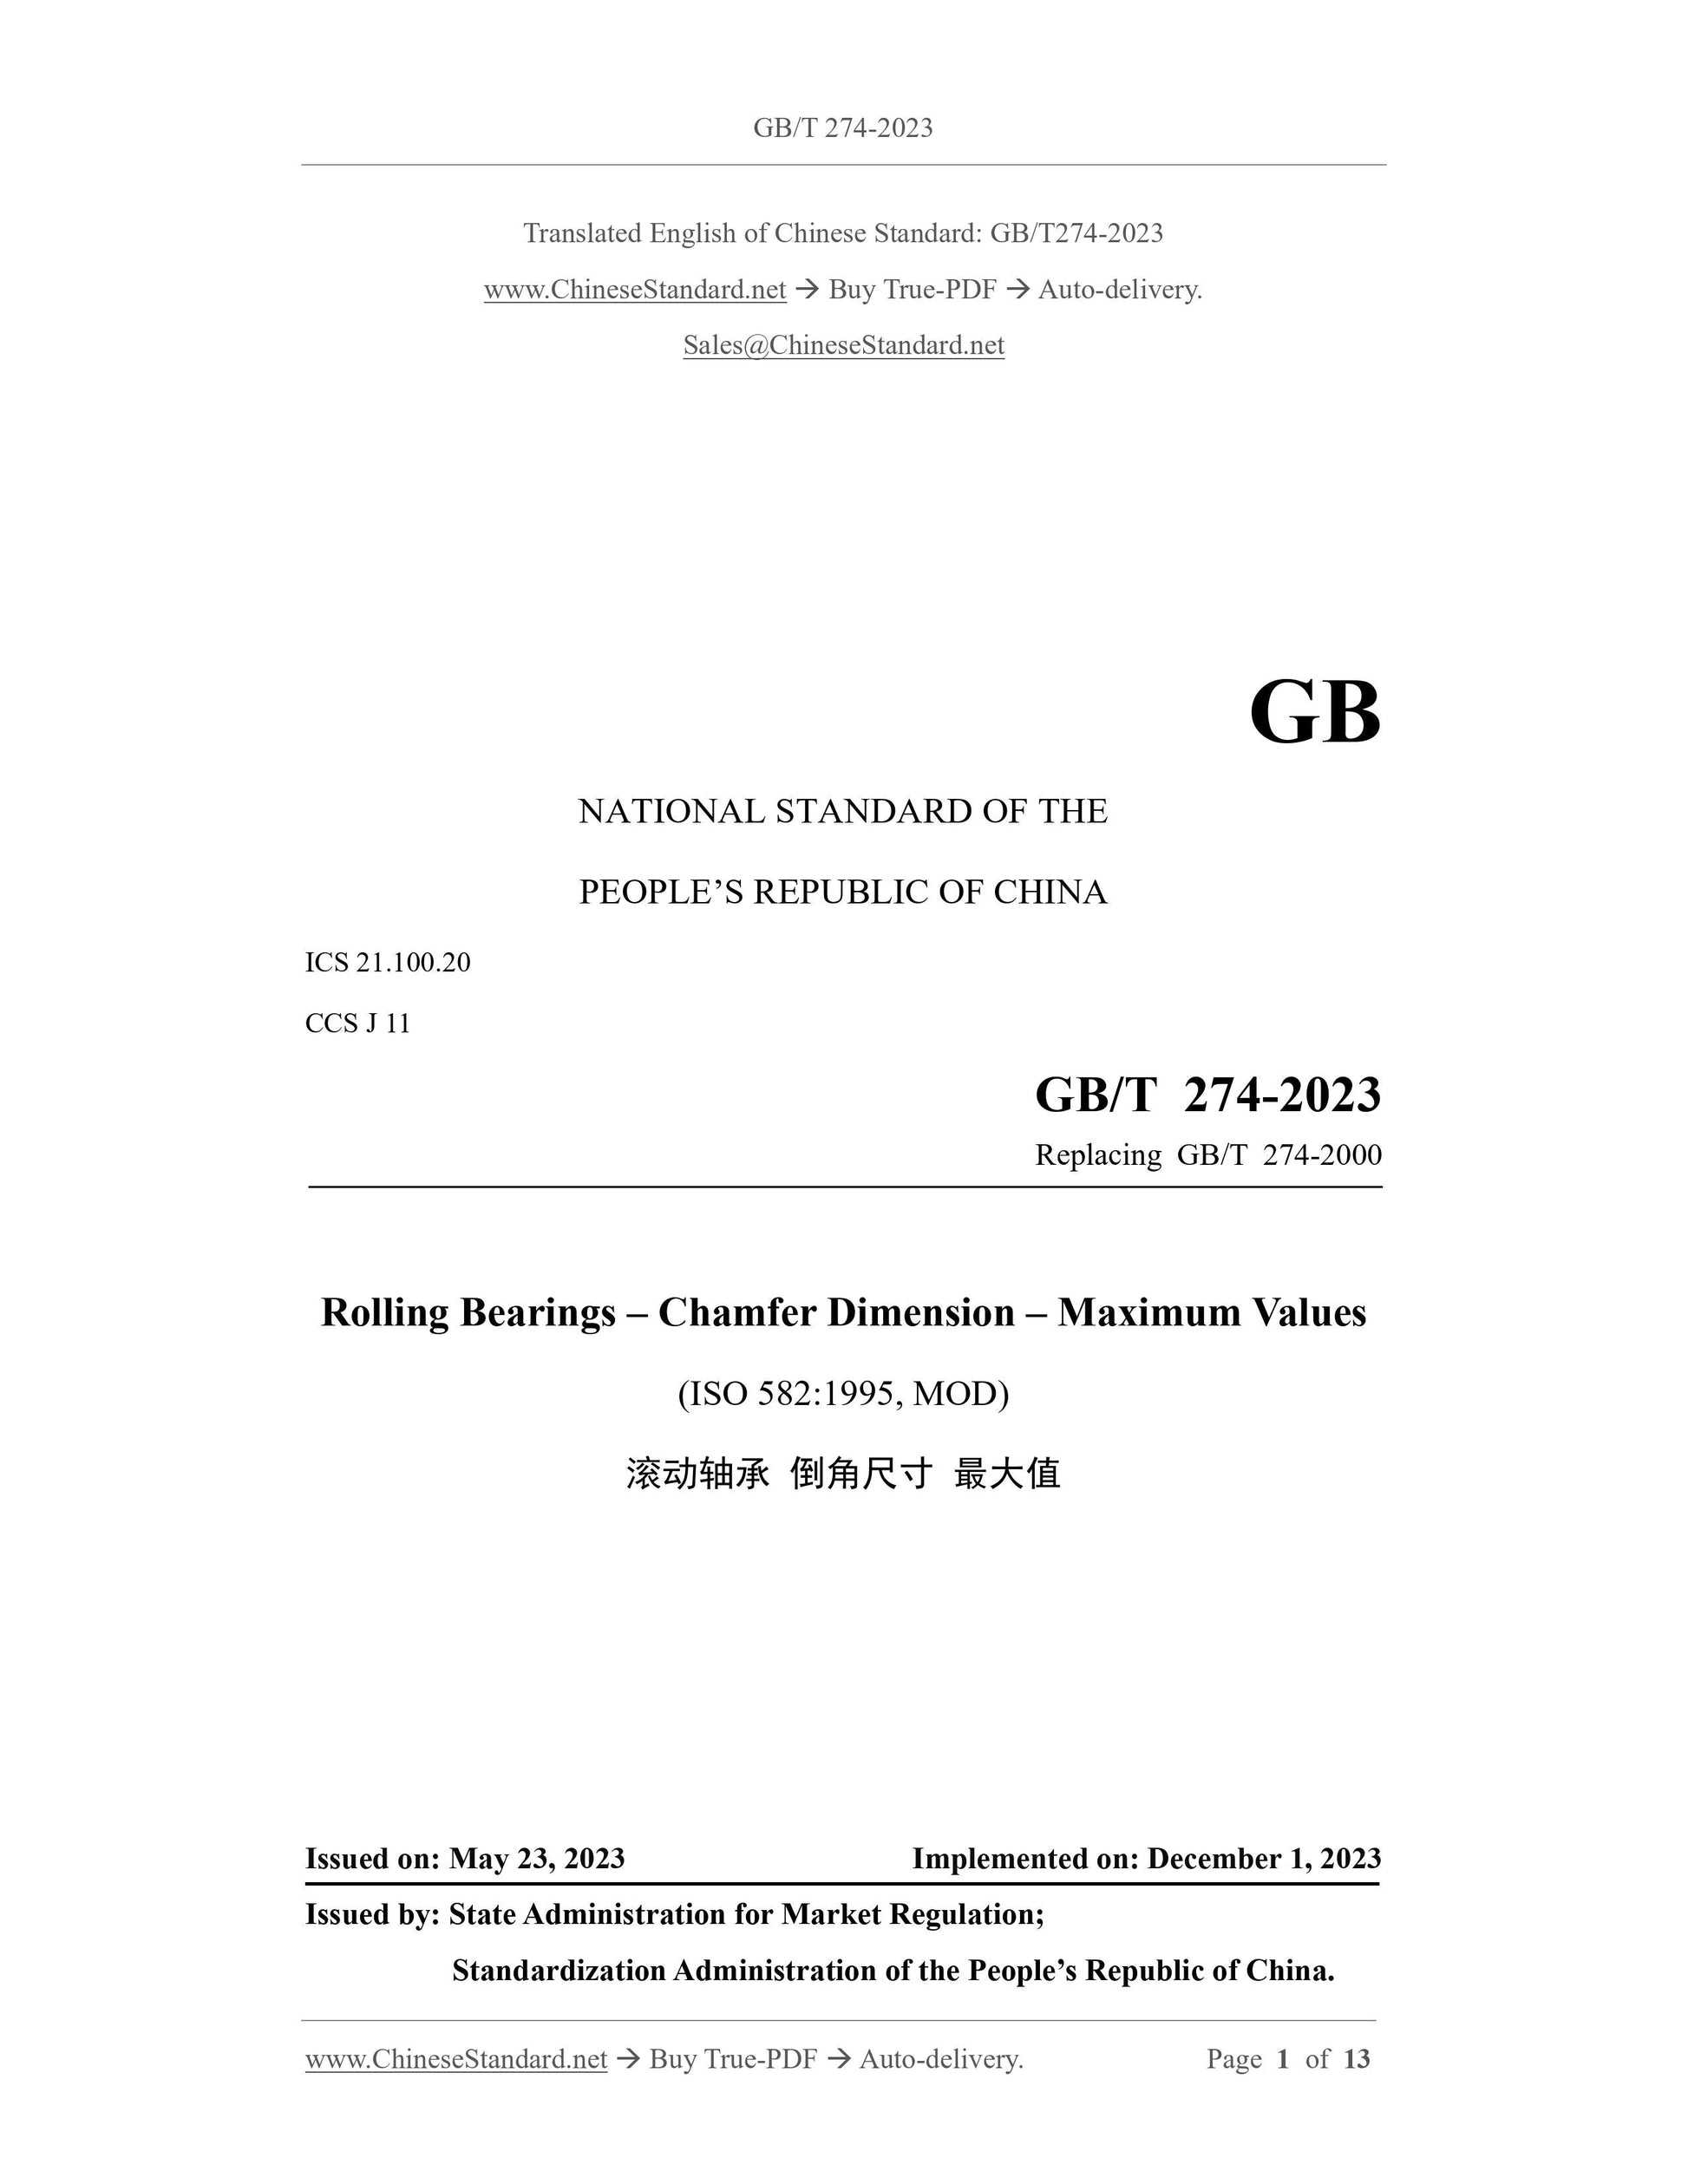 GB/T 274-2023 Page 1